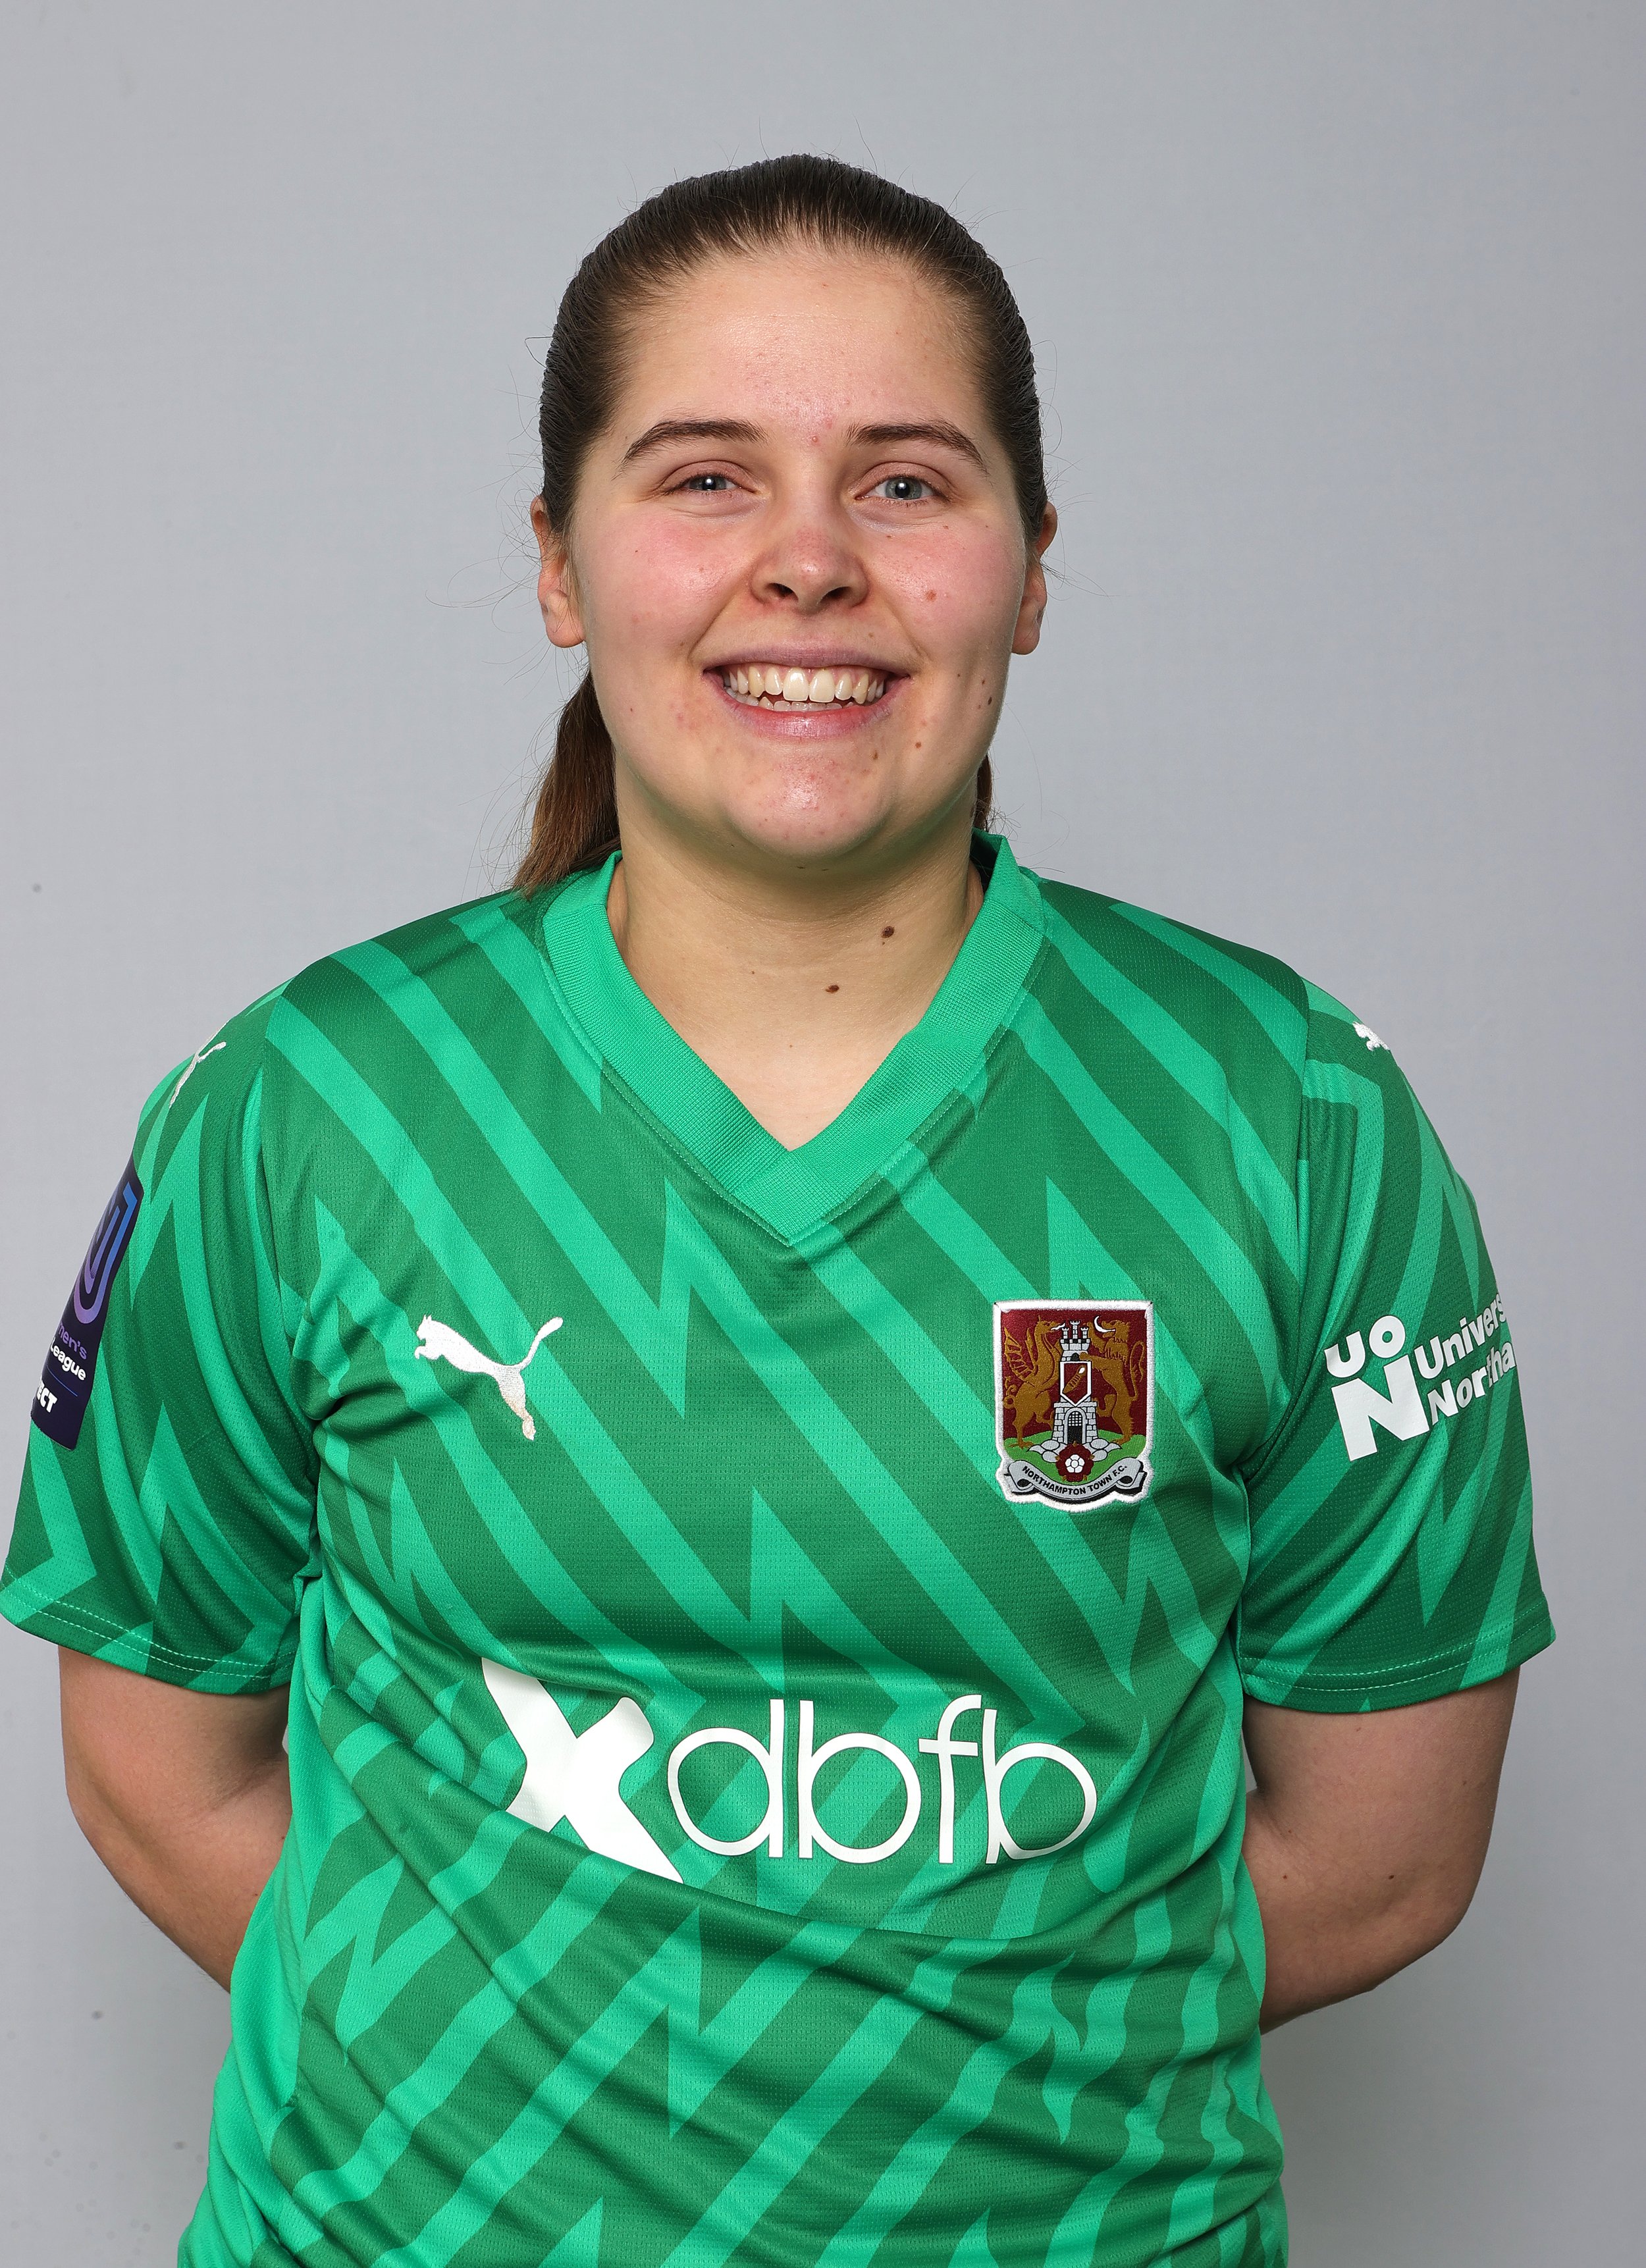 30. Holly Mayfield (GK)